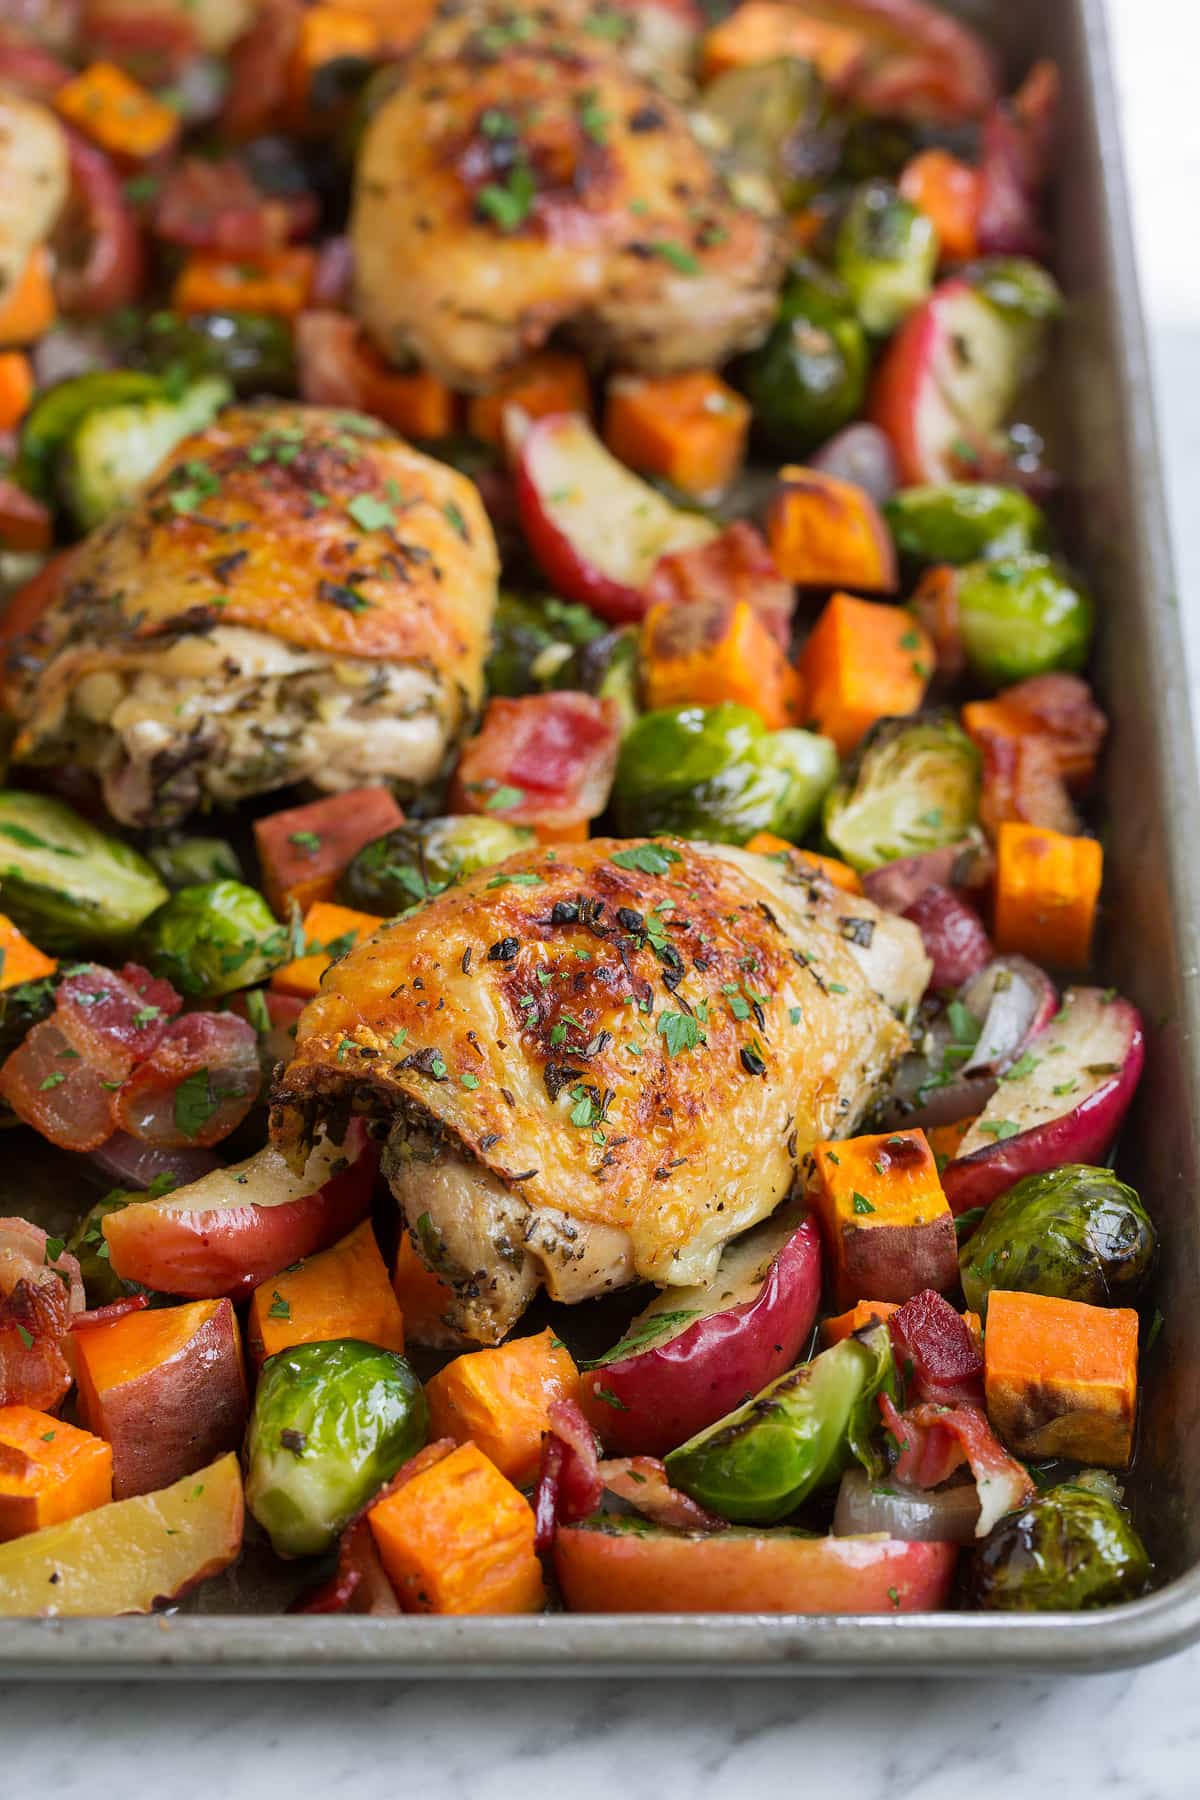 Autumn Chicken Dinner Recipe One Pan! - Cooking Classy